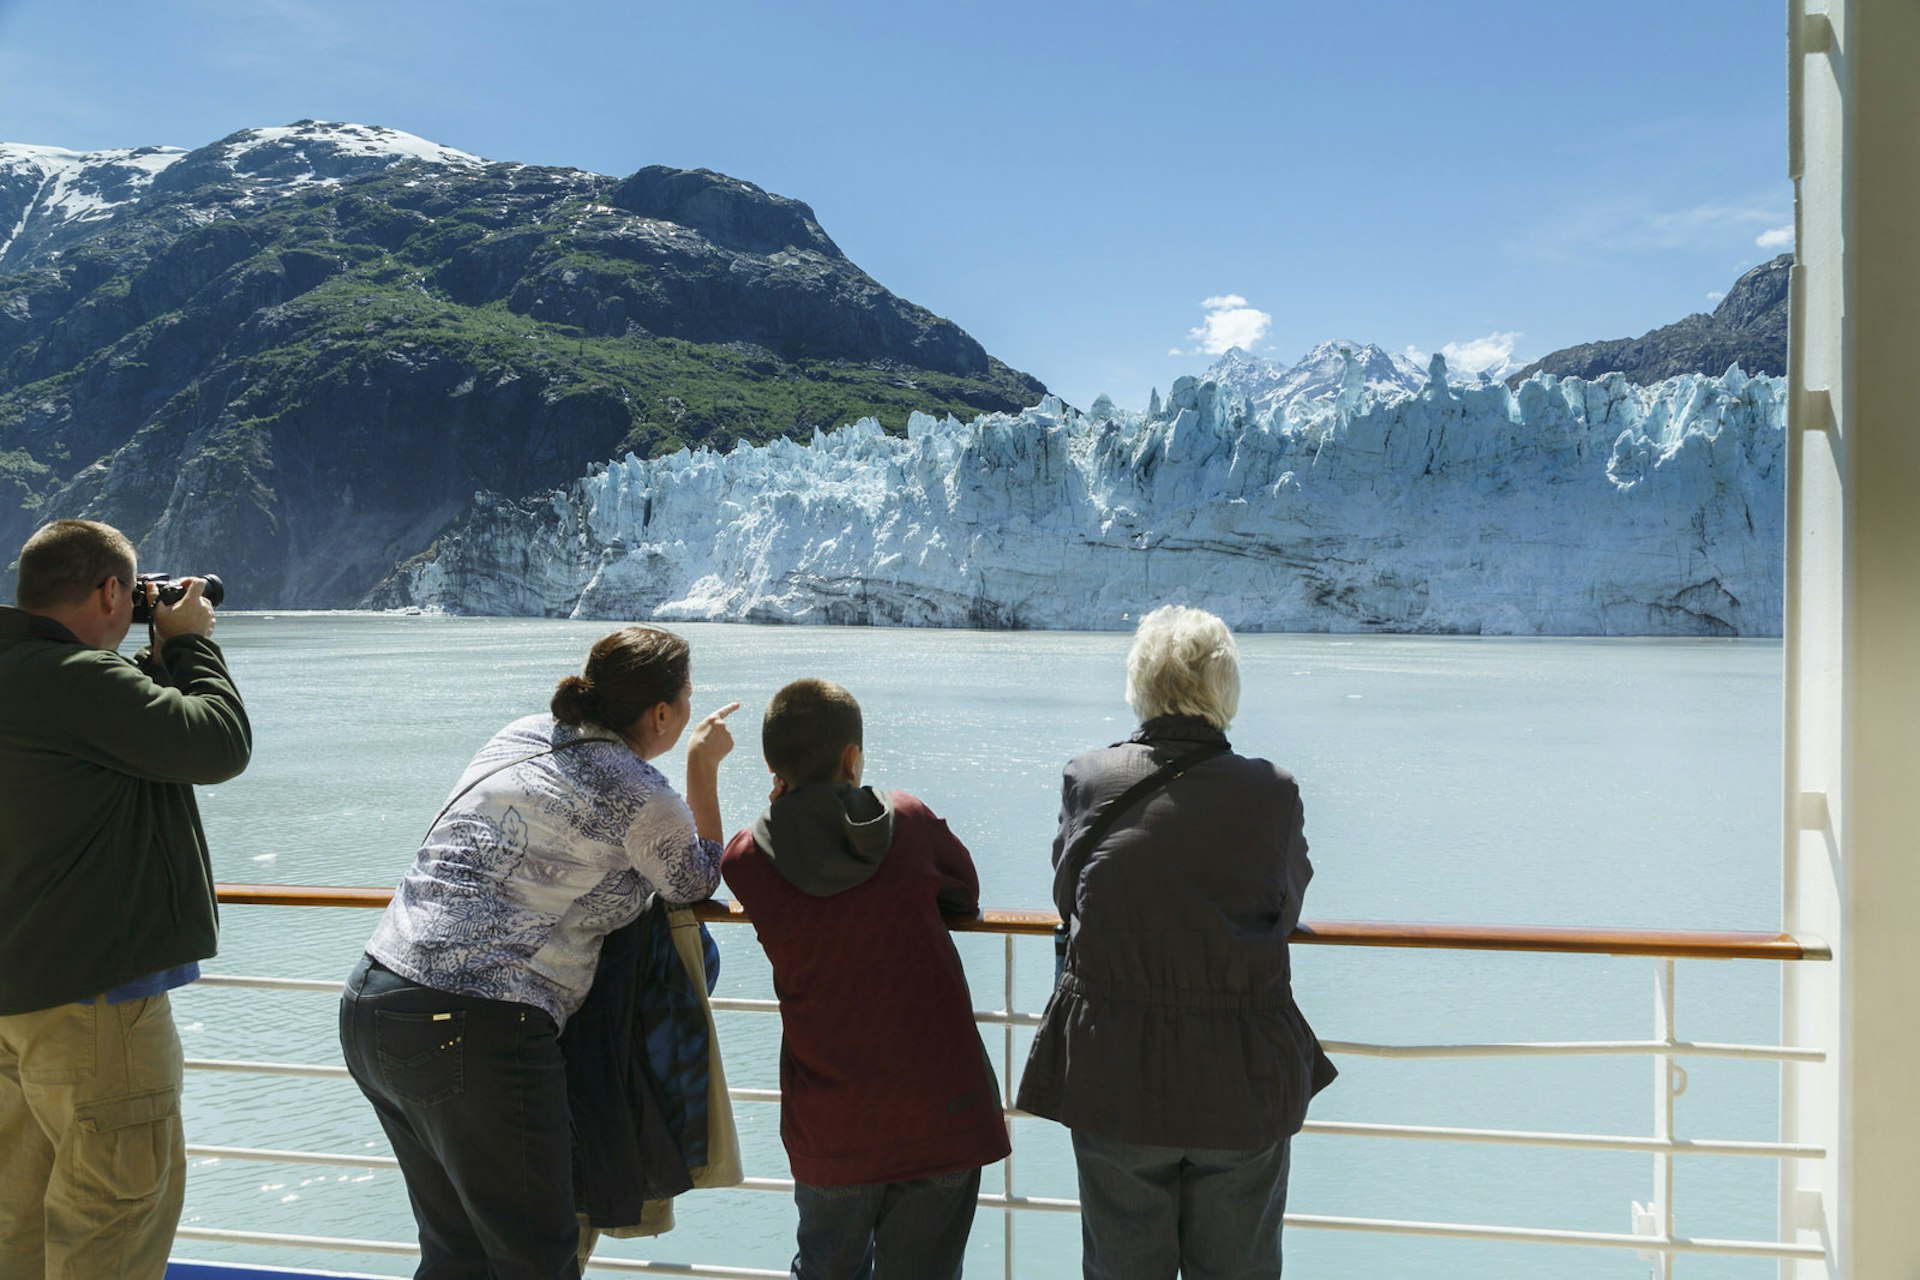 A family of varying ages enjoy the sight of a glacier during a cruise © Jeff Schultz / Getty